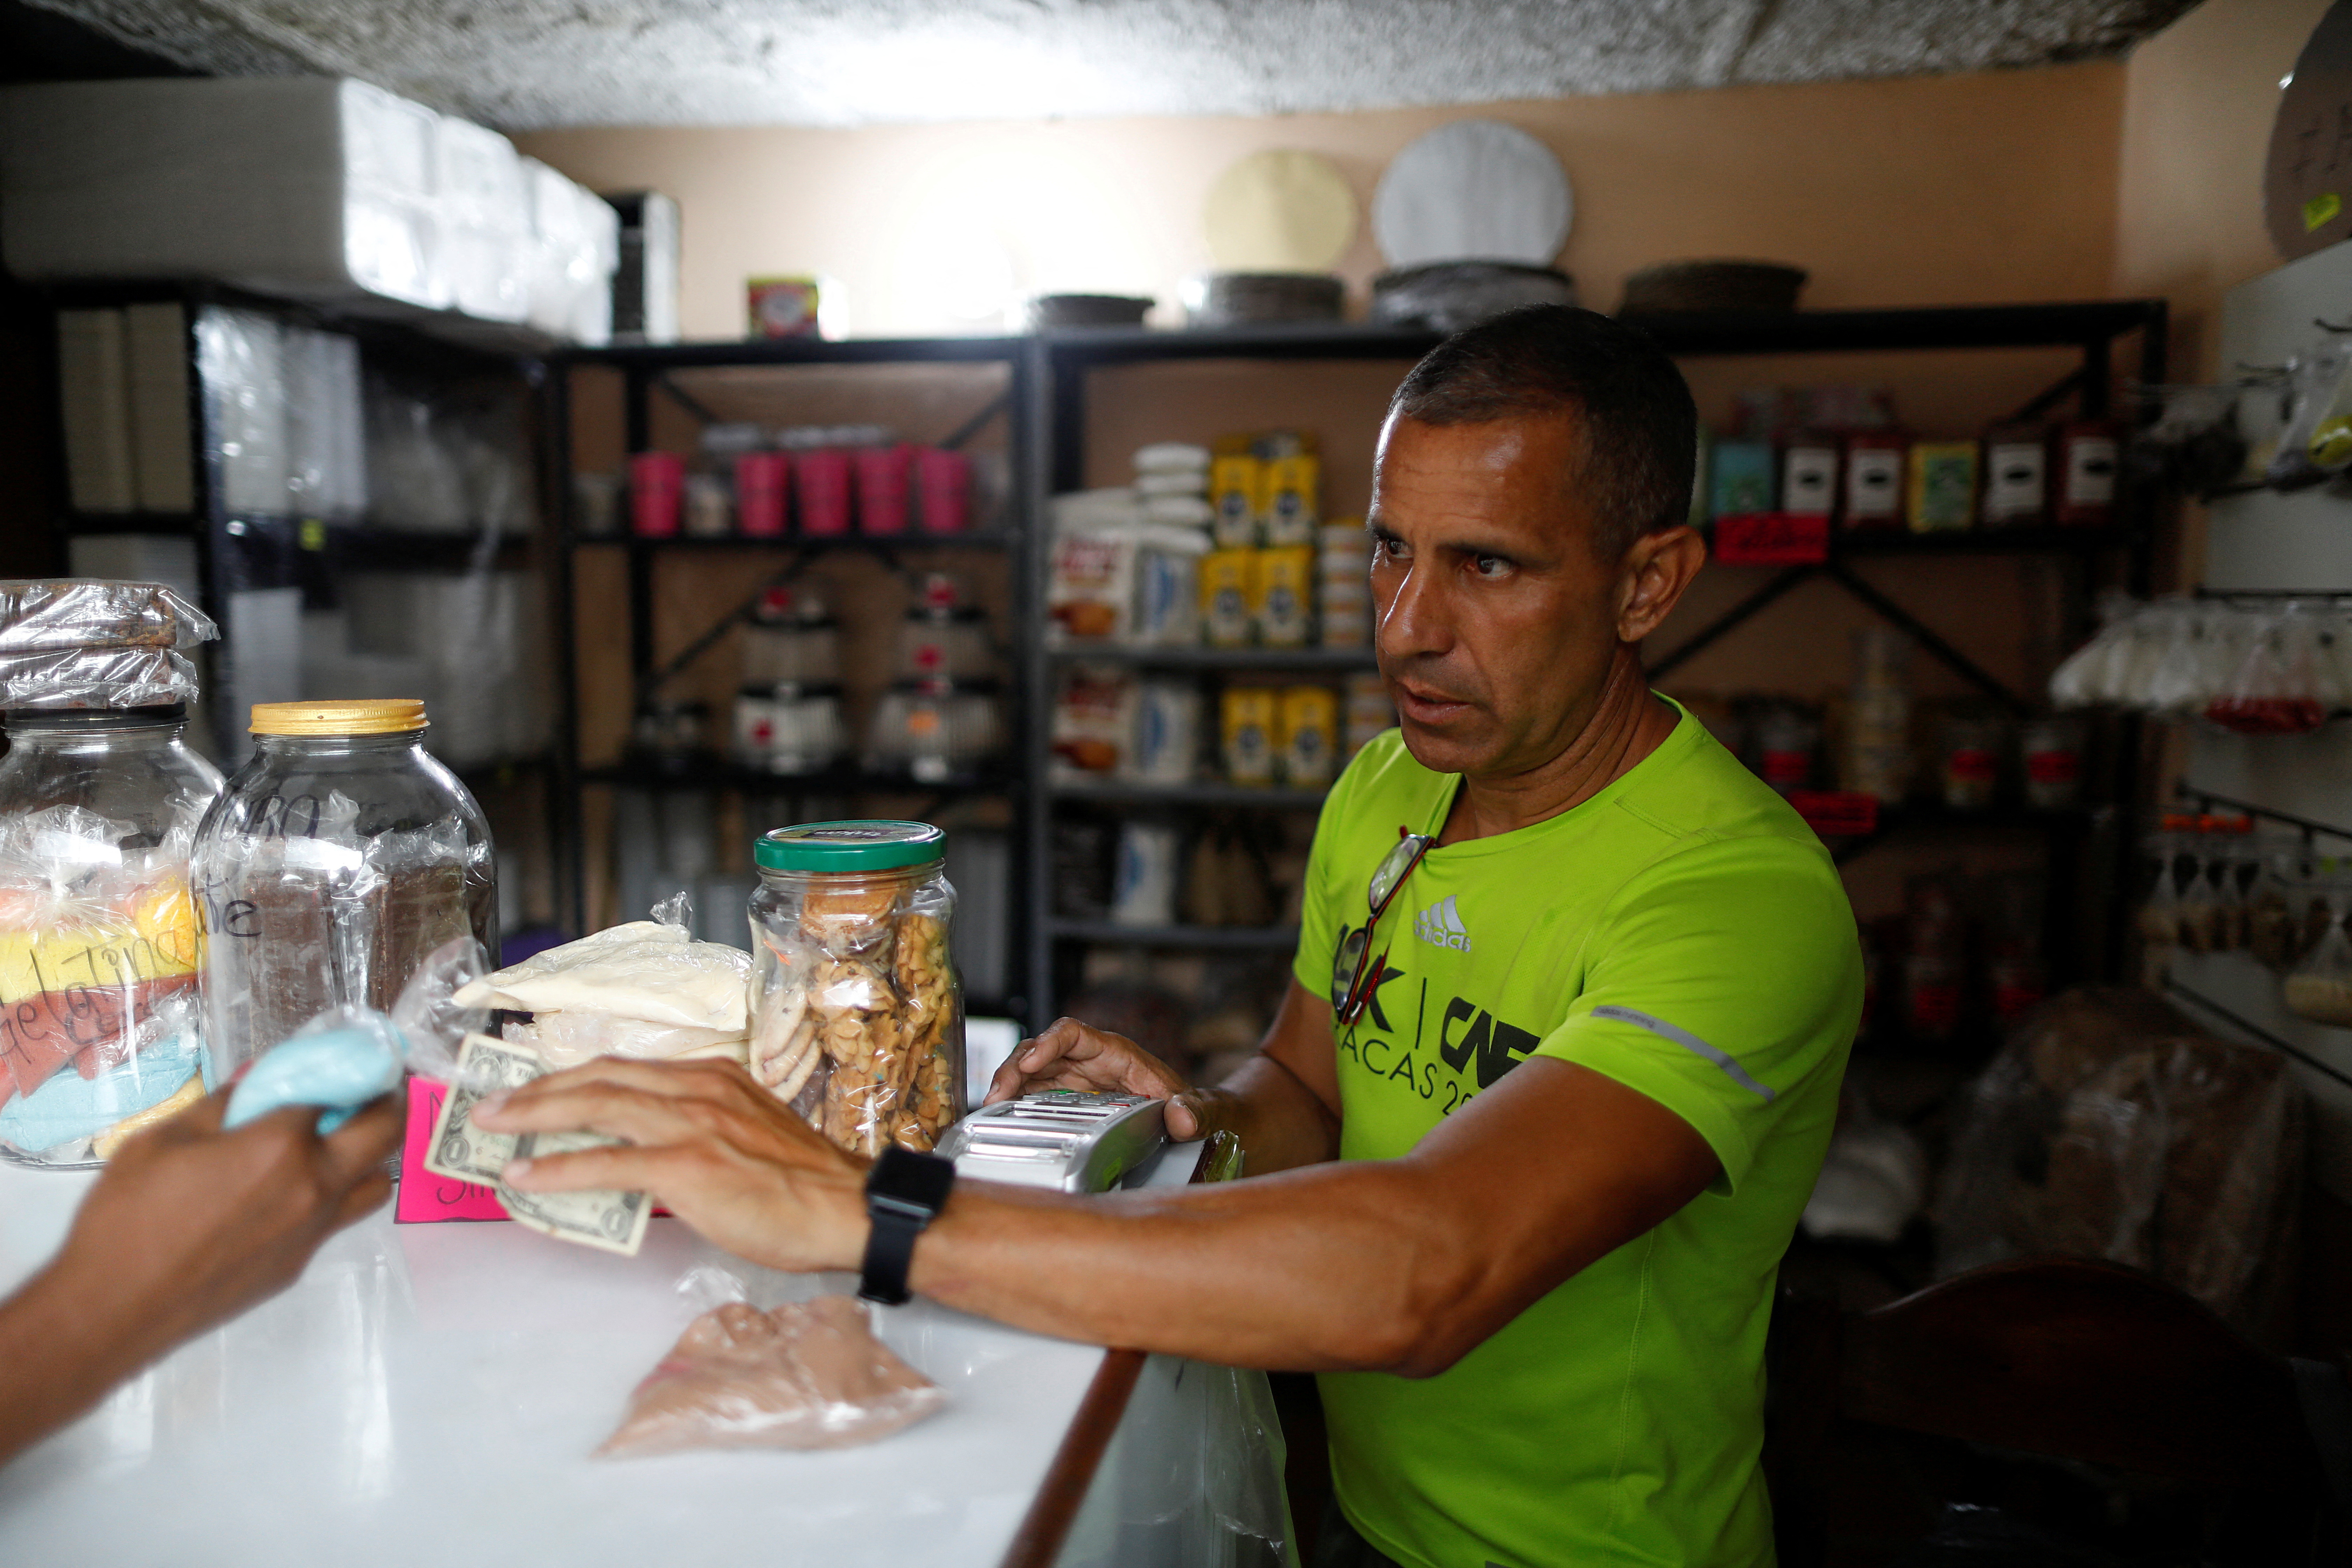 A worker receives a dollar cash payment in a store in a market in Caracas,